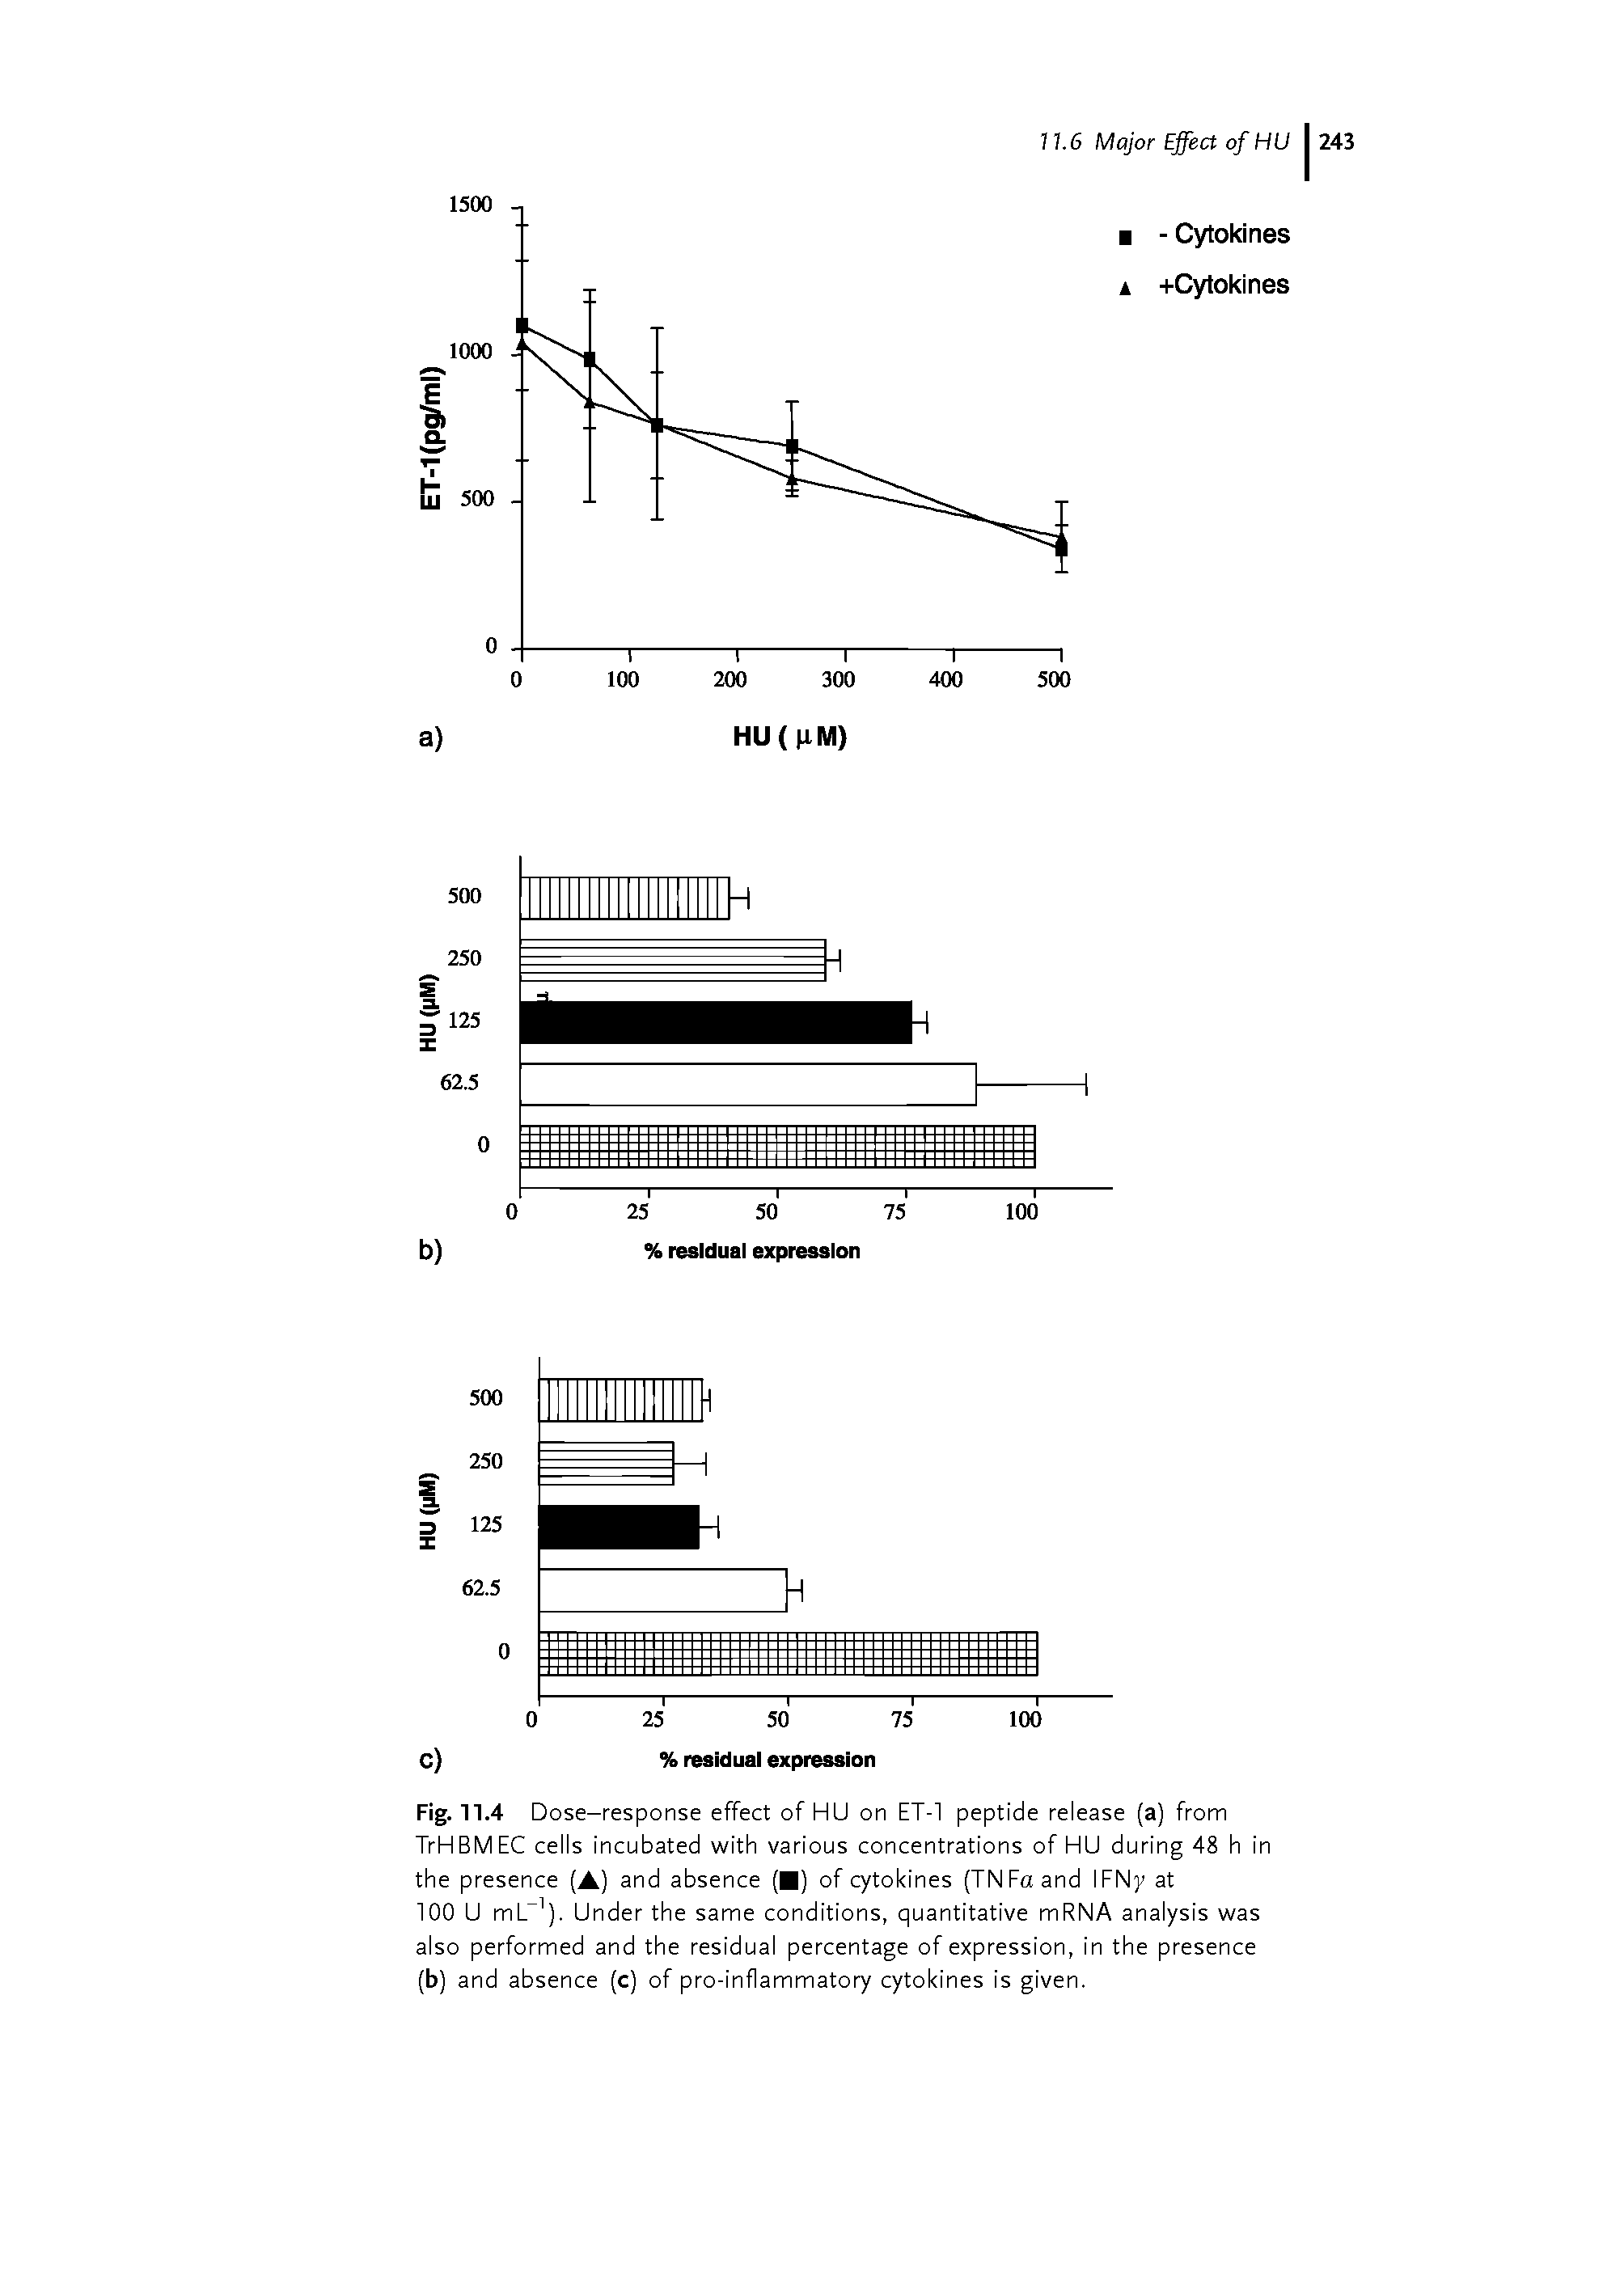 Fig. 11.4 Dose-response effect of HU on ET-1 peptide release (a) from TrHBM EC cells incubated with various concentrations of HU during 48 h in the presence (A) and absence ( ) of cytokines (TNFaand IFNy at 100 U mL 1). Under the same conditions, quantitative mRNA analysis was also performed and the residual percentage of expression, in the presence (b) and absence (c) of pro-inflammatory cytokines is given.